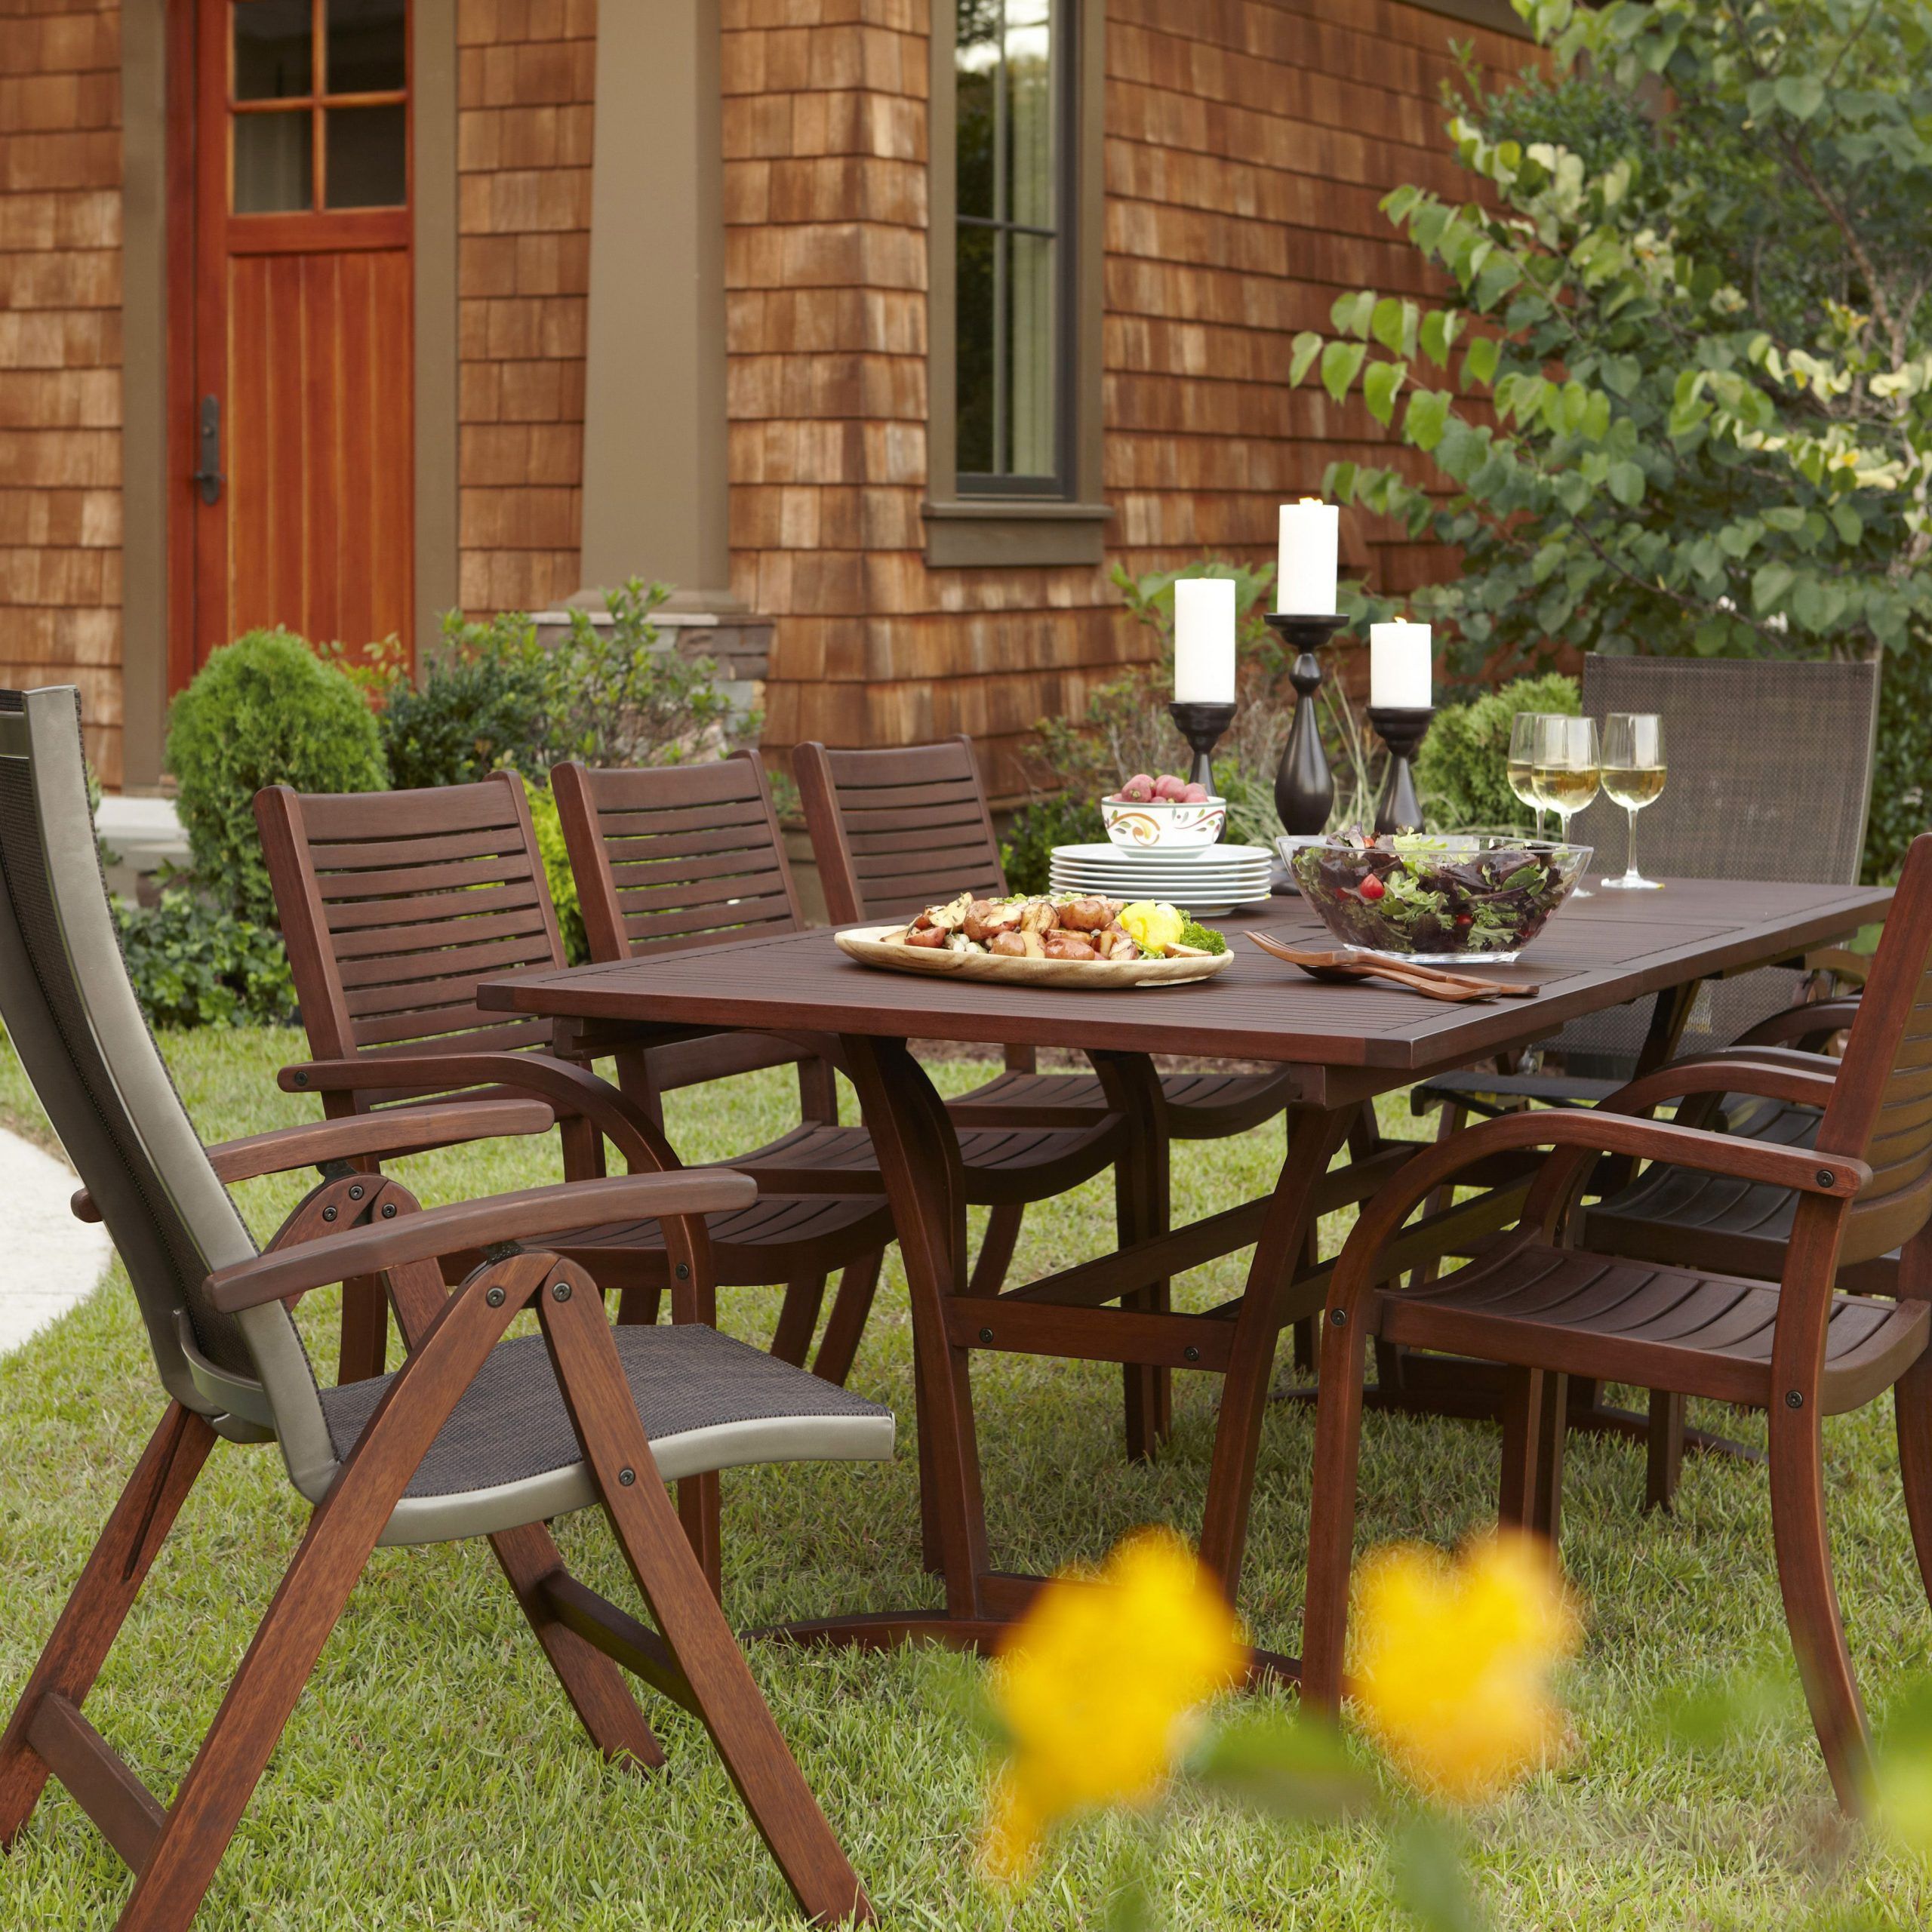 Pin On Patio Paradise Regarding Dark Wood Outdoor Chairs (View 3 of 15)